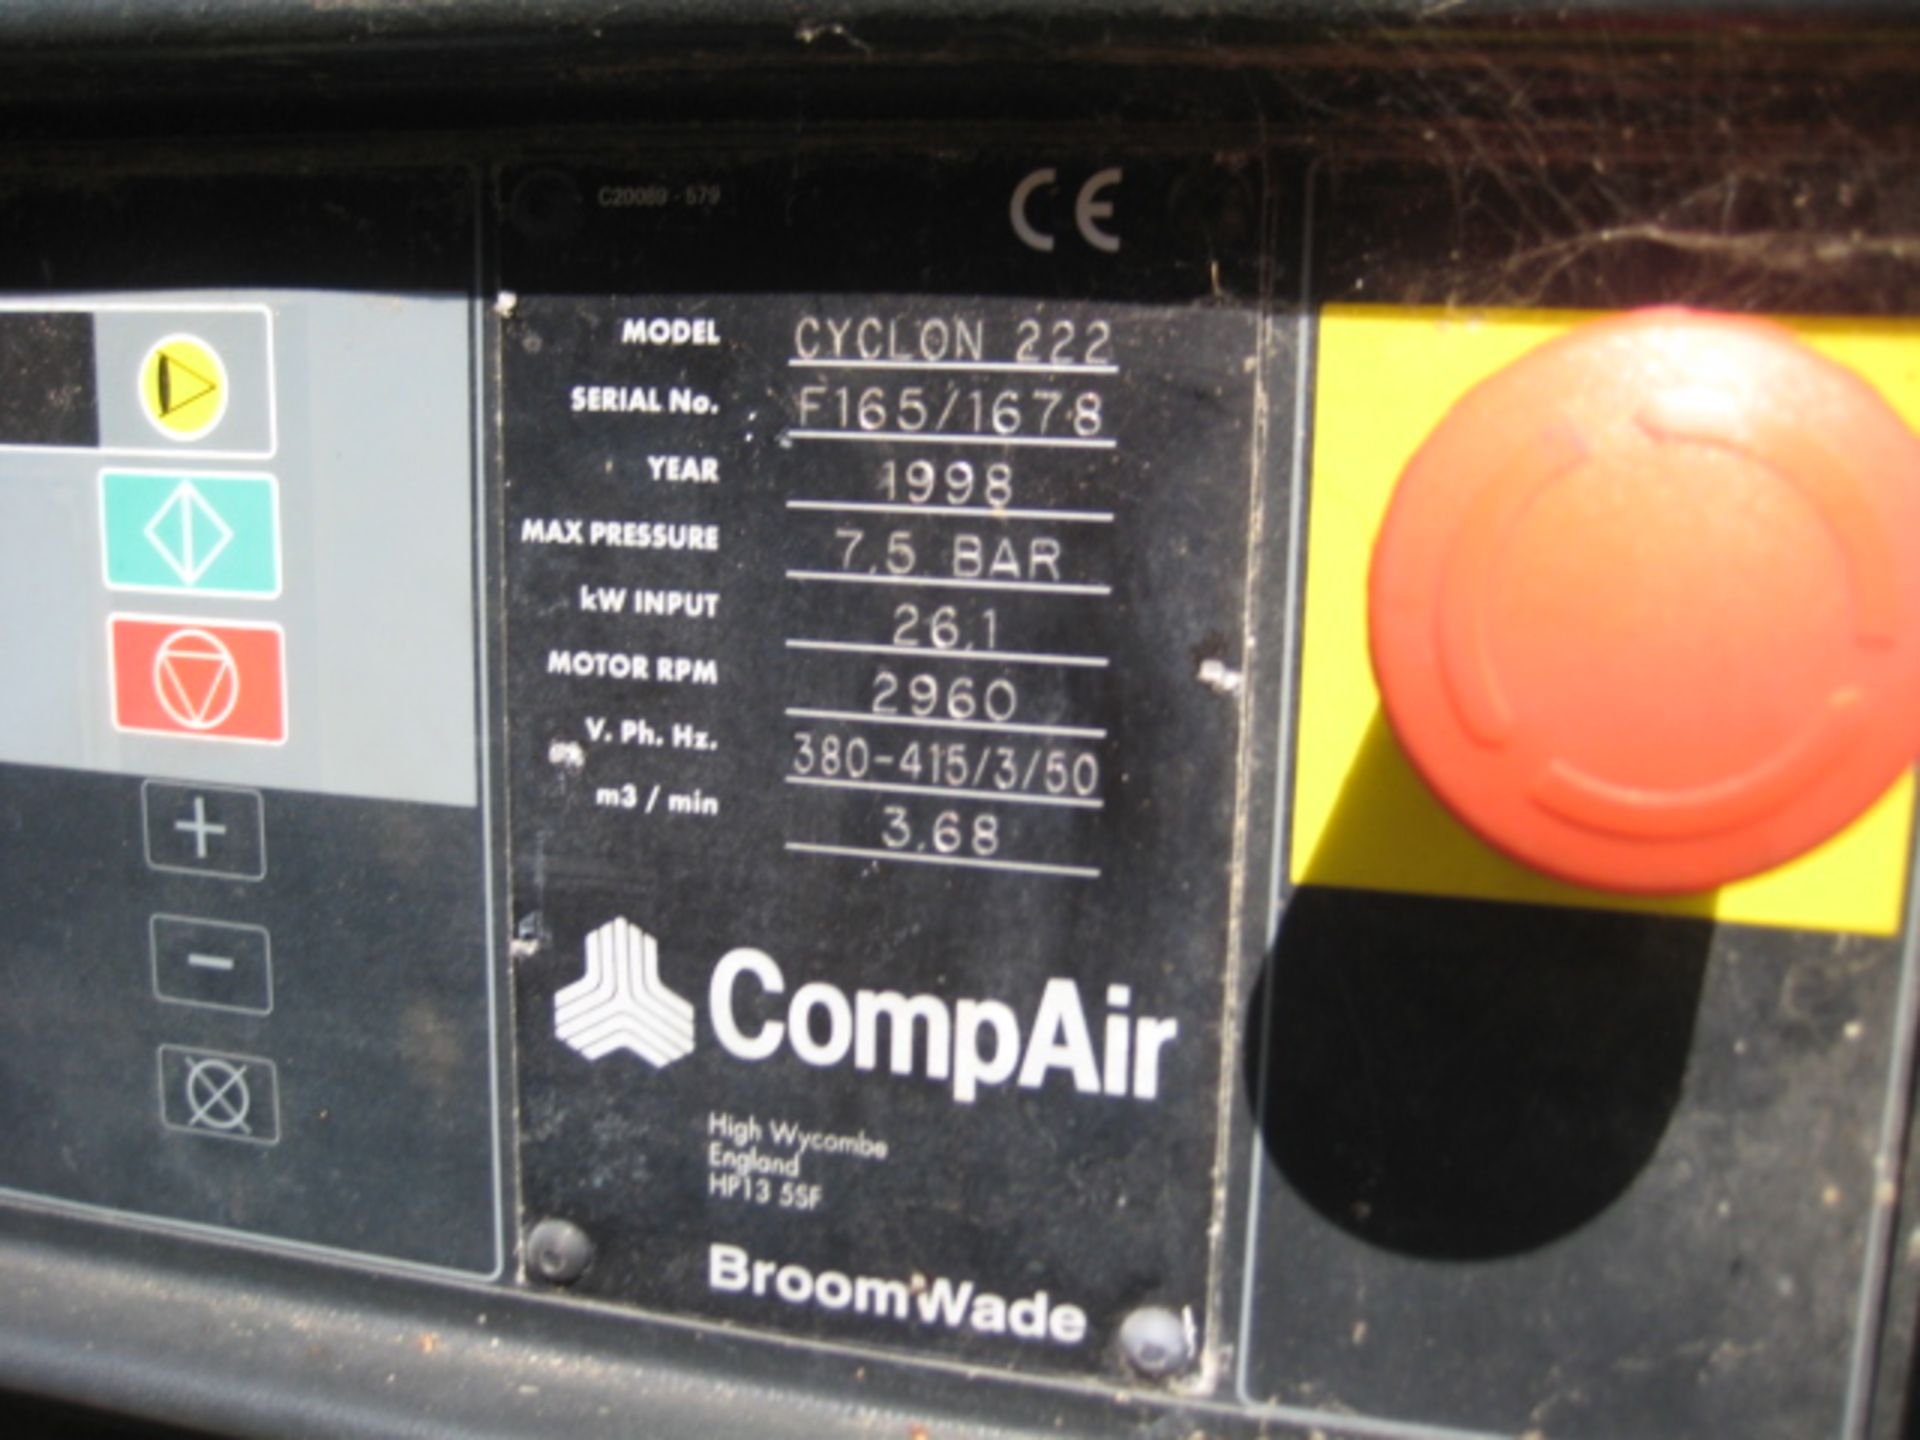 Broomwade Compair Cyclon 22 Compressor, serial no. F165/1678, year of manufacture 1998, in - Image 2 of 5